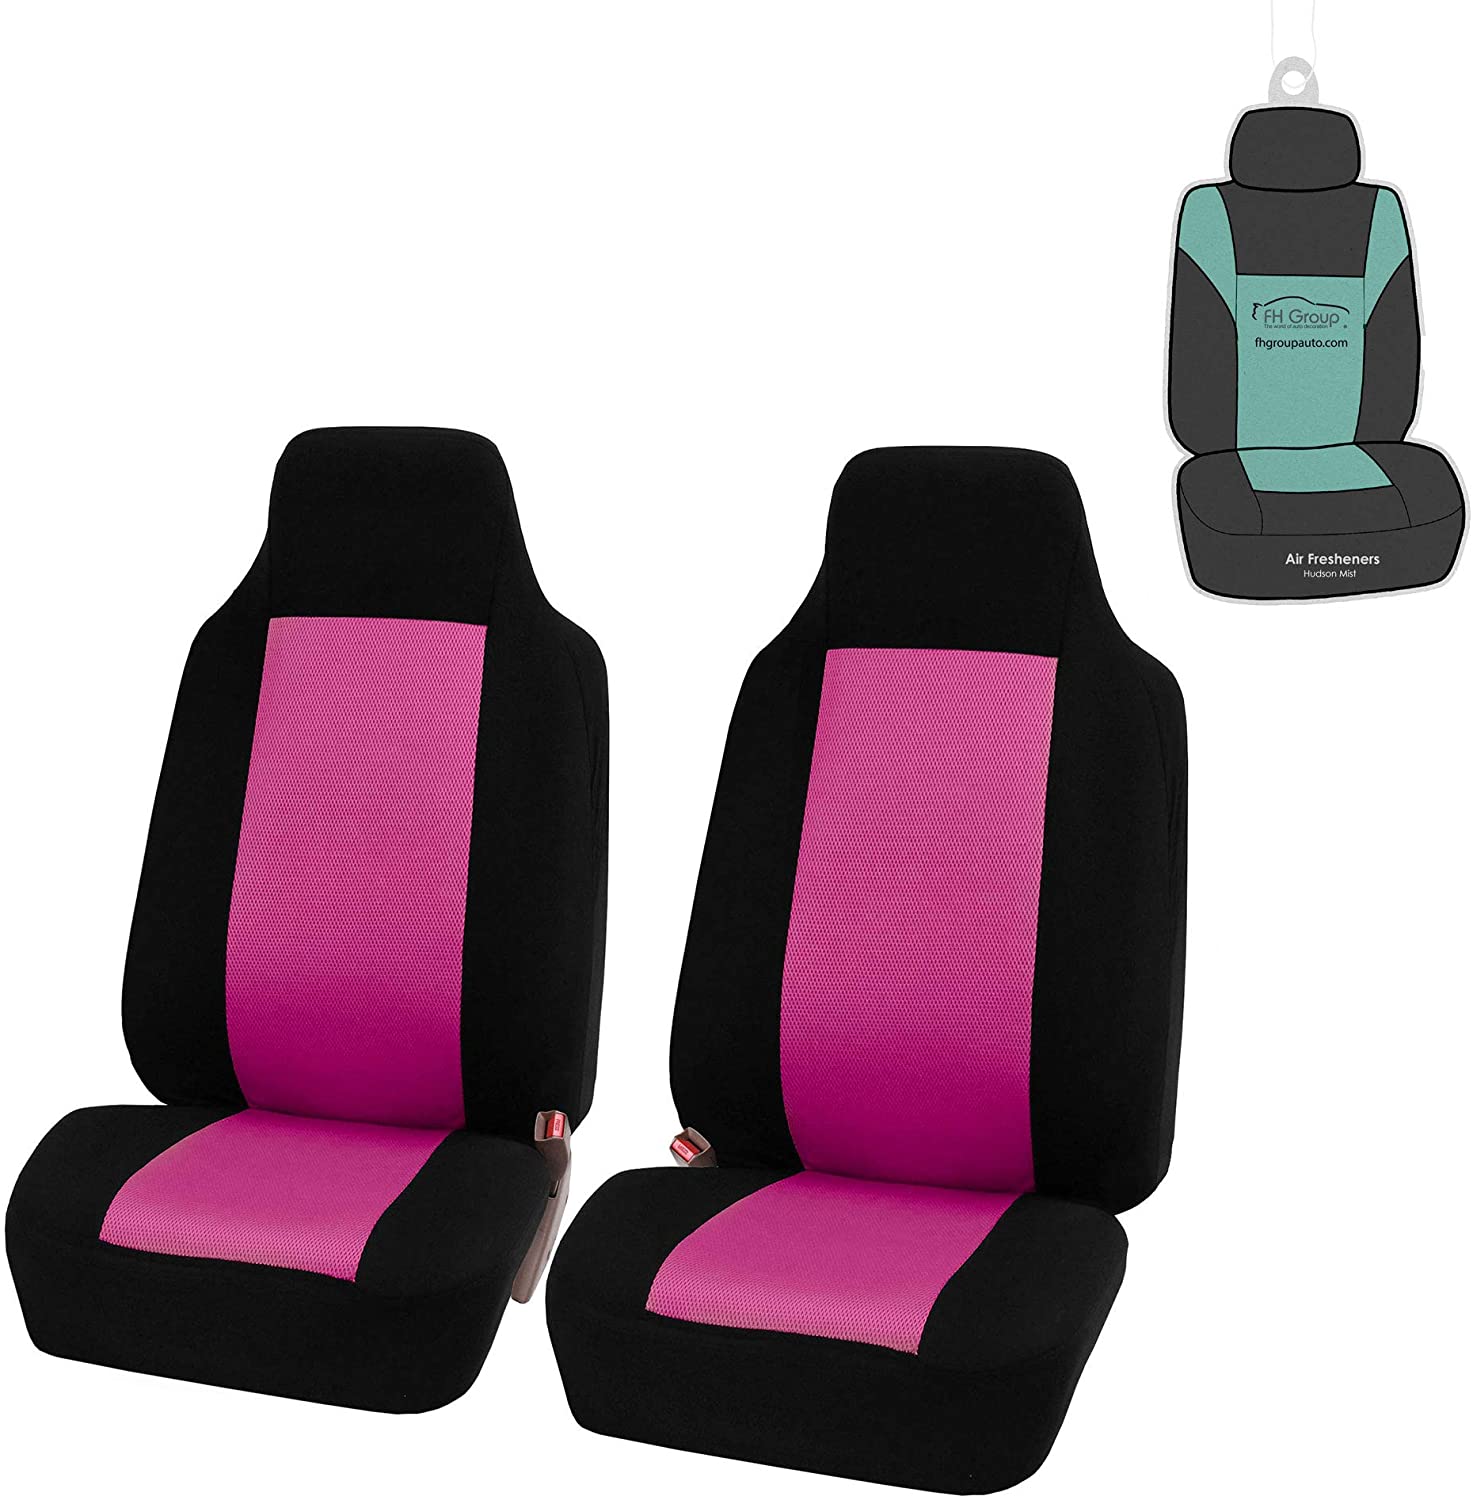 FH Group FB102102 Classic Cloth Seat Covers (Pink) Front Set with Gift – Universal Fit for Cars Trucks & SUVs